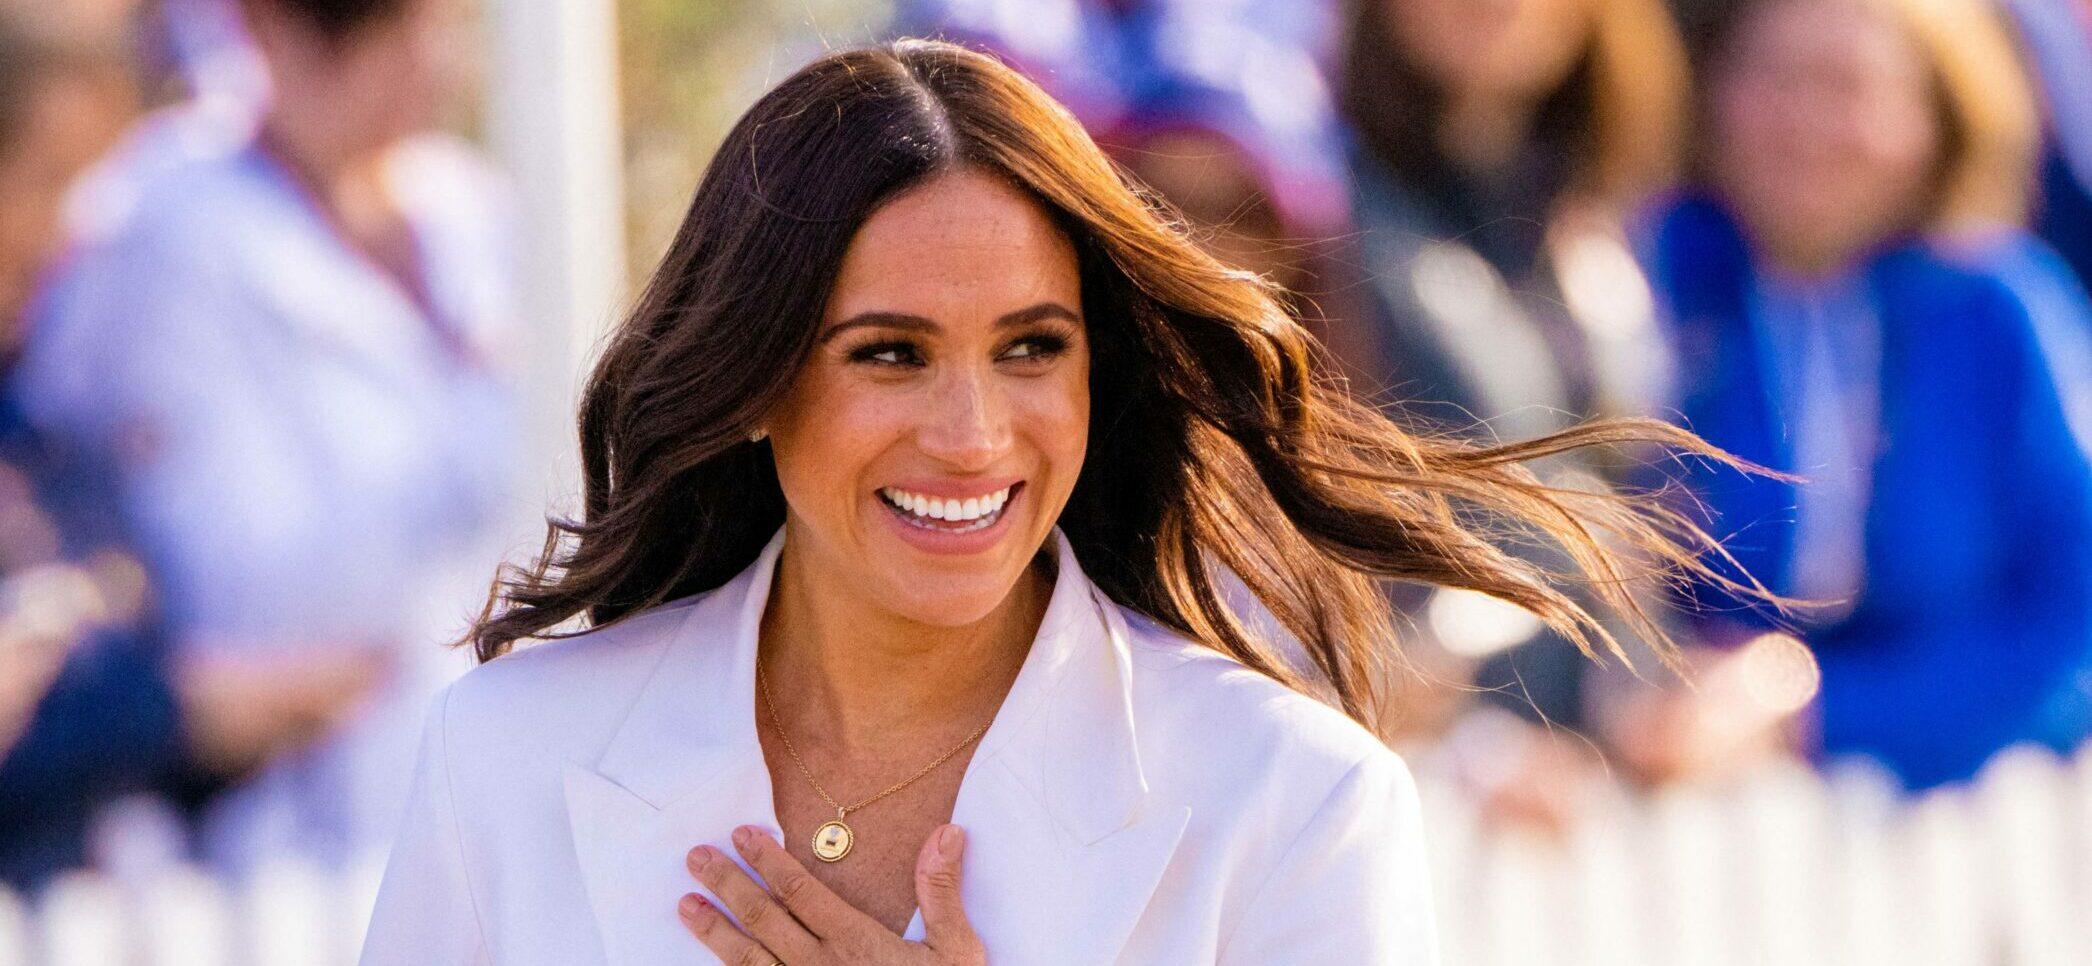 Meghan Markle Breaks Silence On Making Of Her Royal Website By A ‘Special Company’